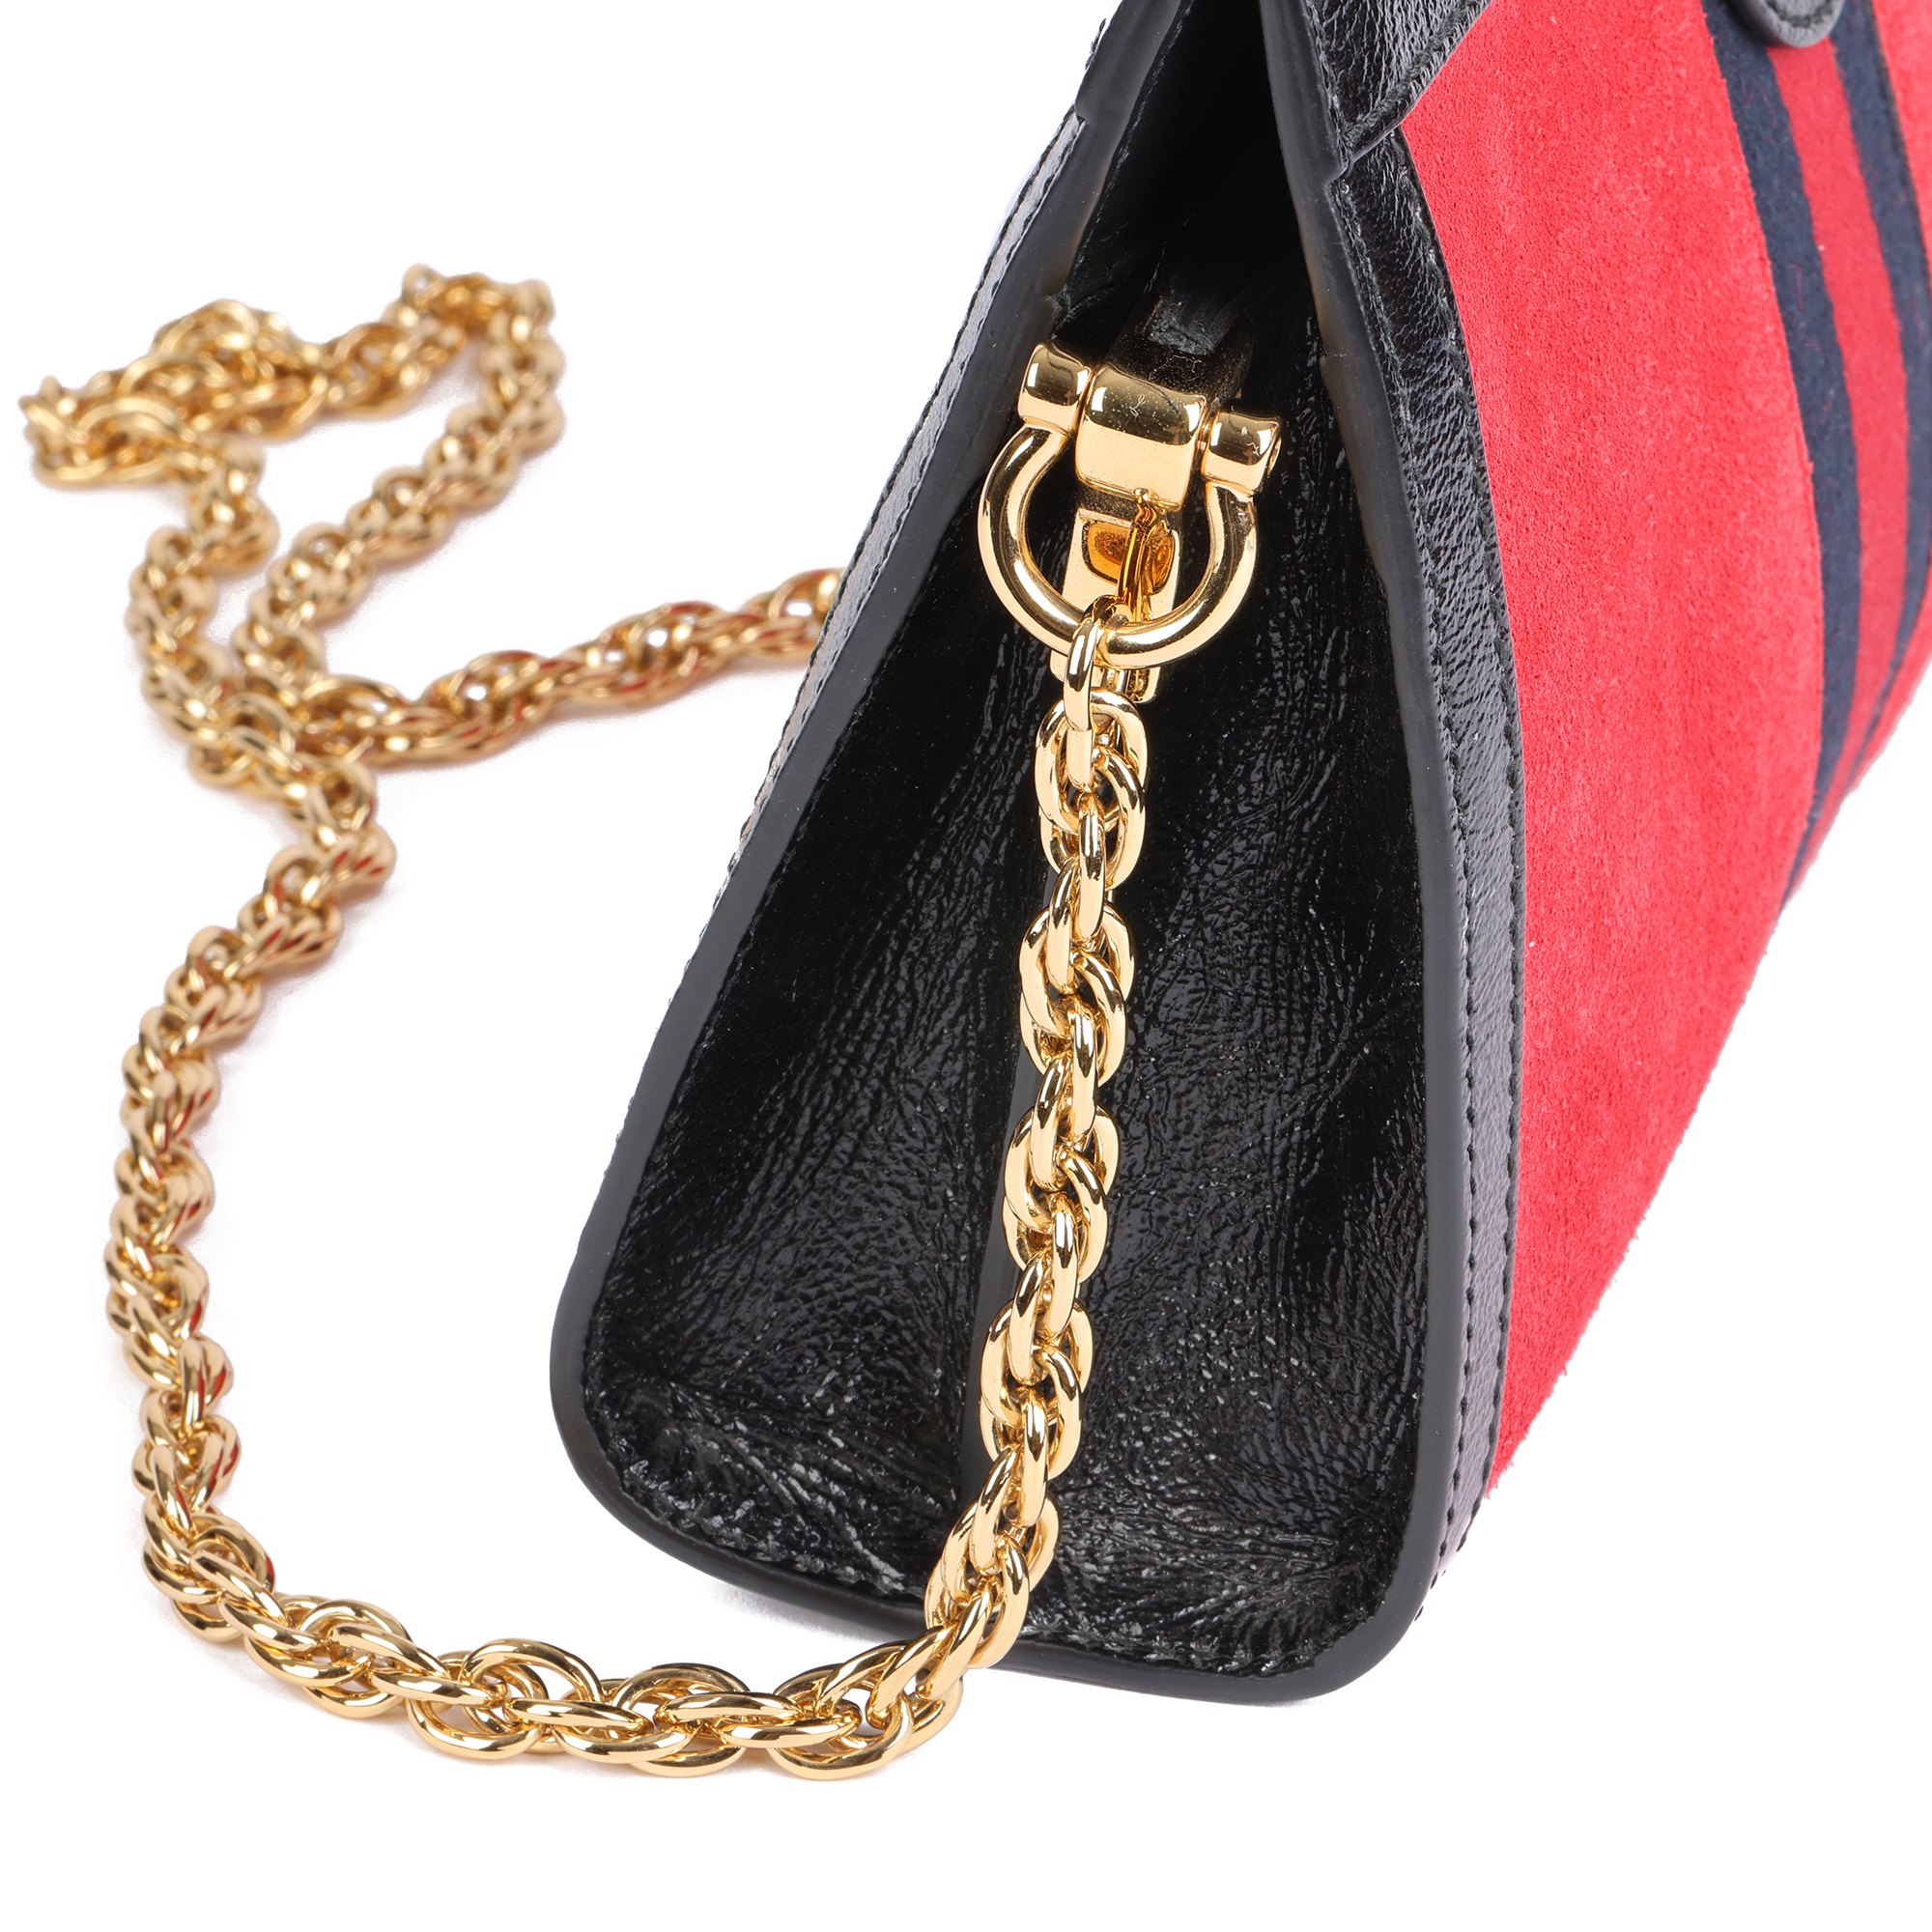 Gucci Red Suede & Black Patent Leather Orphidia Shoulder Bag